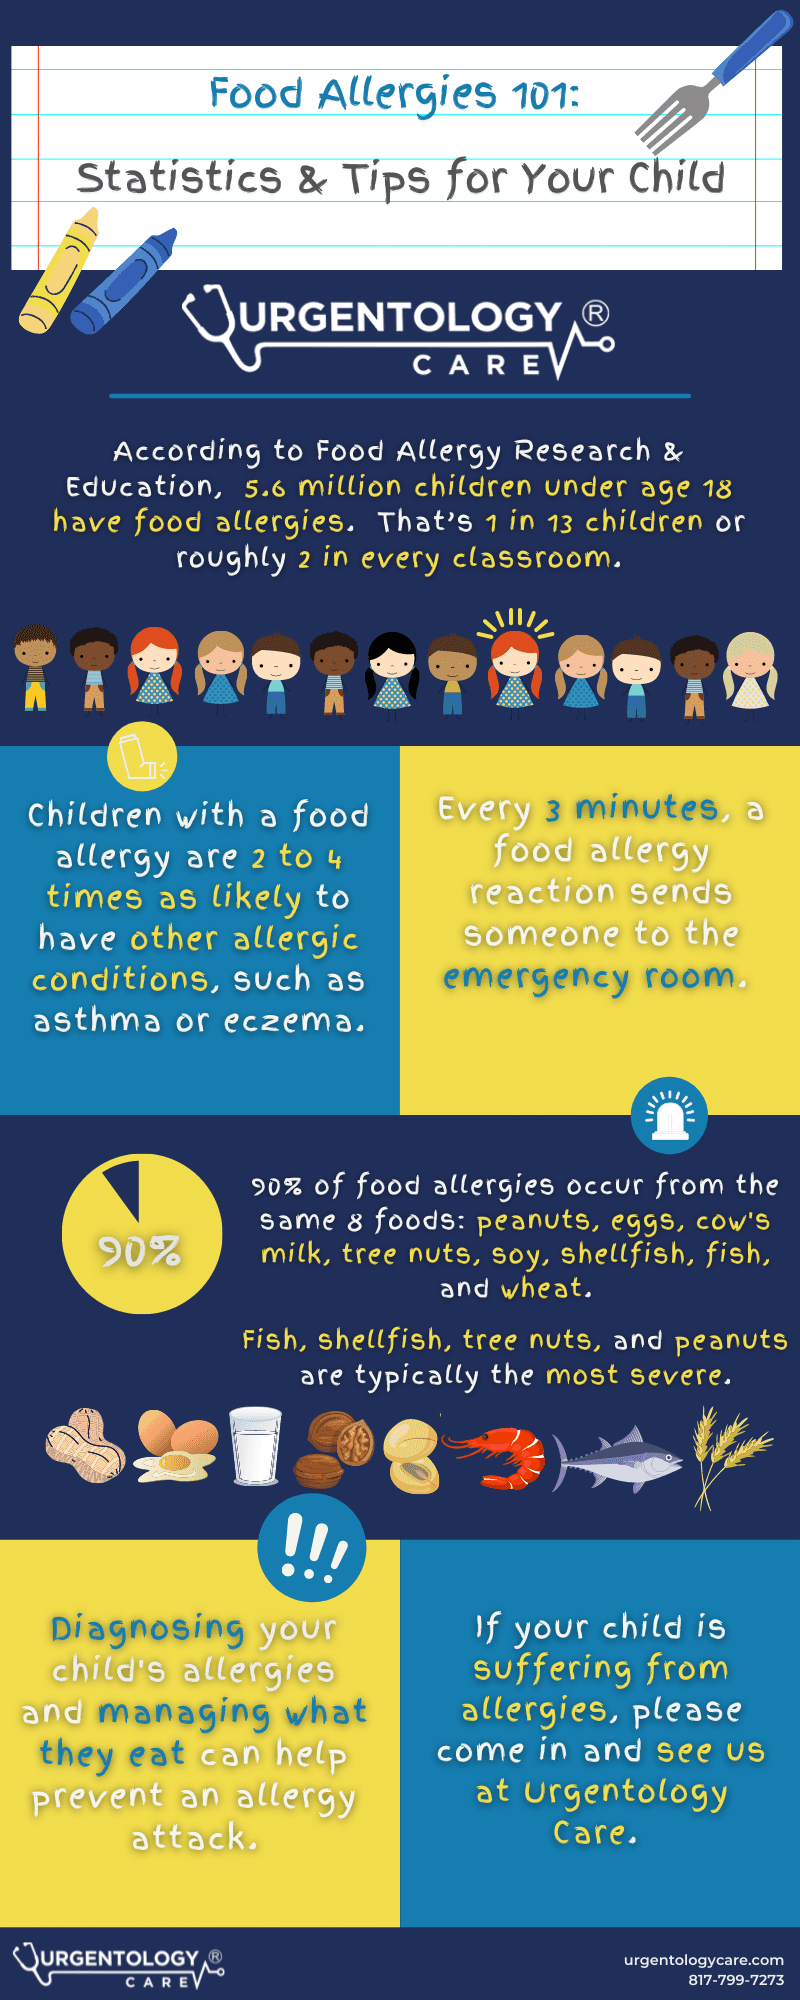 Food Allergies 101: Statistics & Tips for You